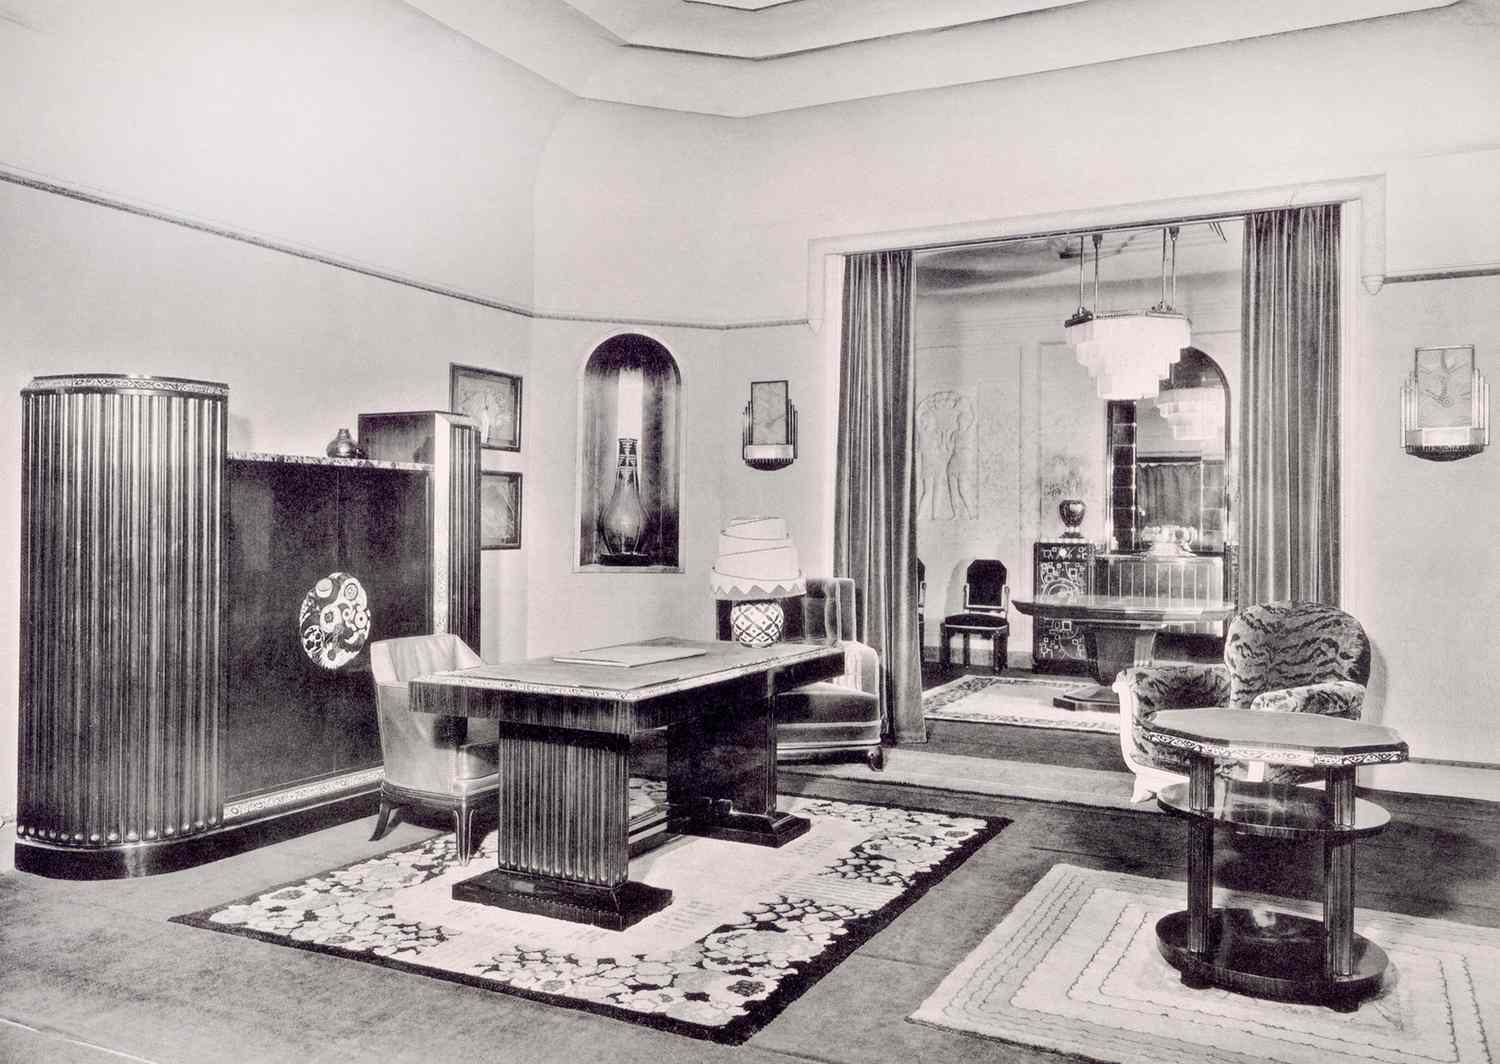 room circa 1920s decorated in art deco style with metallic and geometric finishes